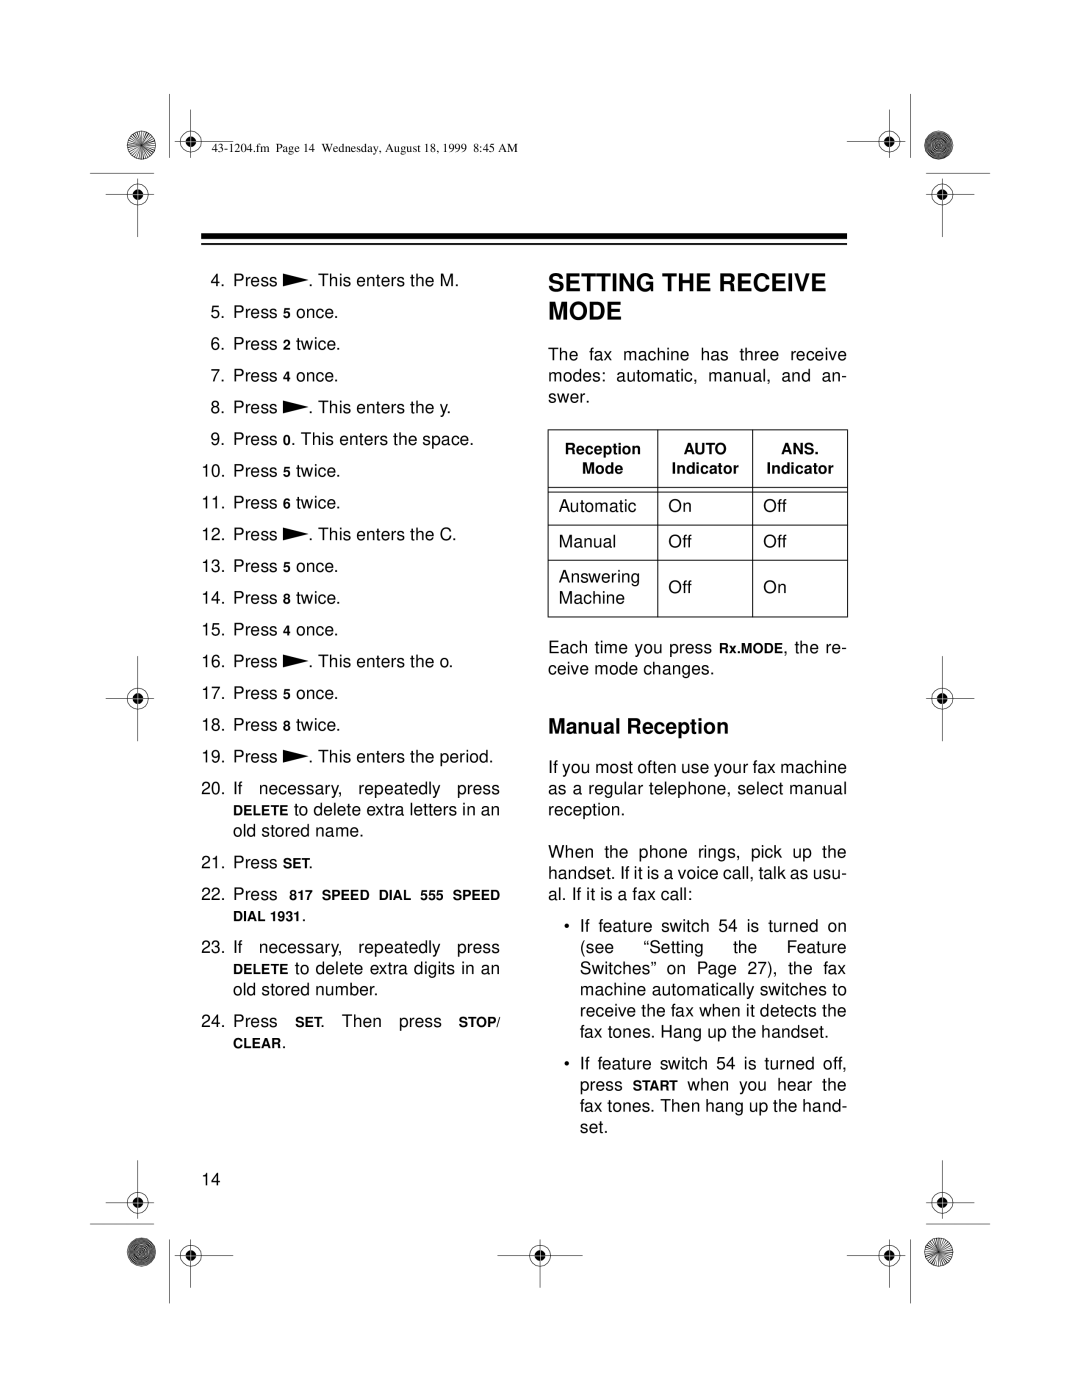 Radio Shack 43-1204 owner manual Setting The Receive Mode, Manual Reception 